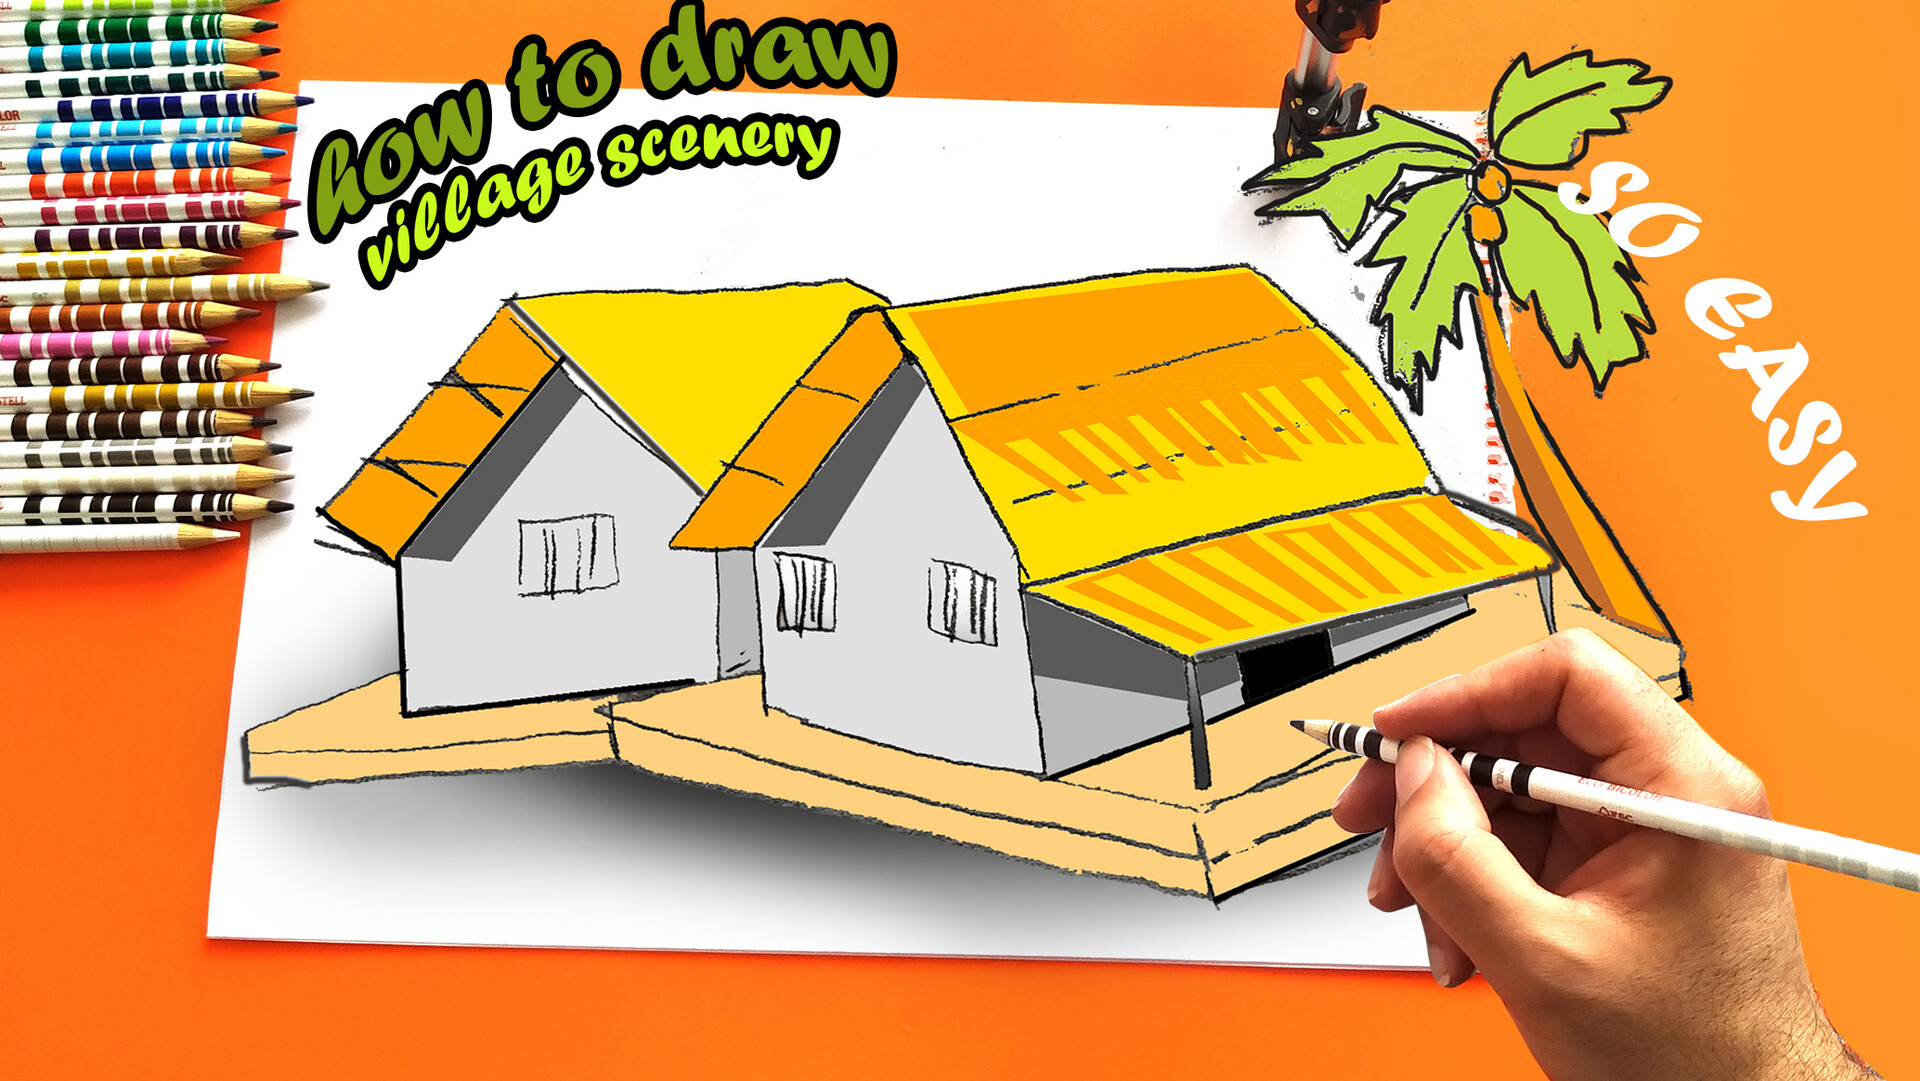 How to Draw a Village Scenery for Beginners | Scenery Drawing Step by Step  | গ্রামের দৃশ্য অঙ্ক… | Art competition ideas, Oil pastel drawings easy,  Sky art painting